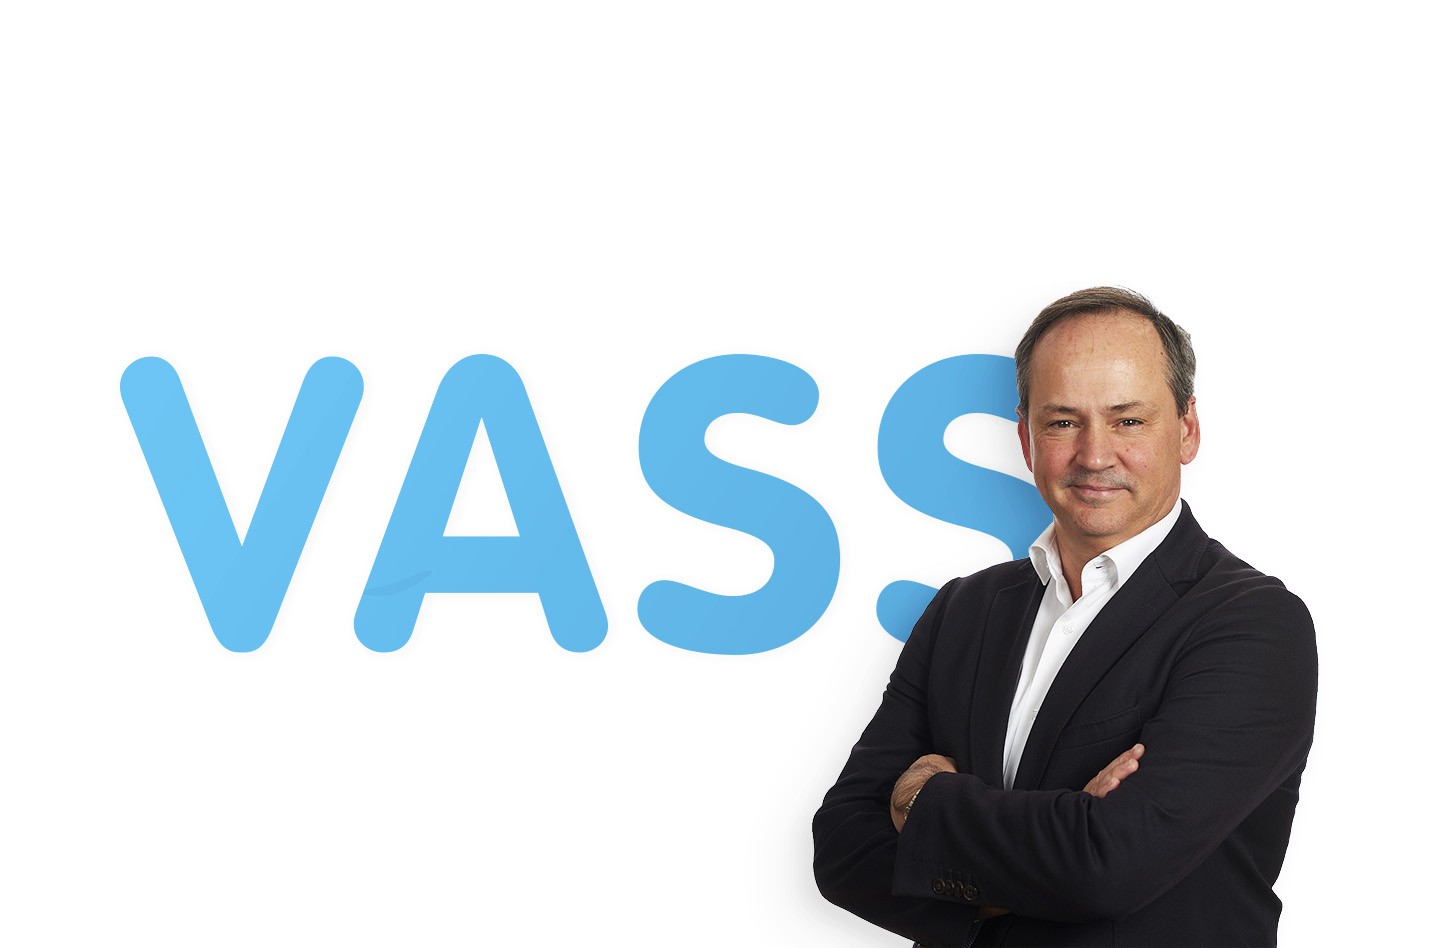 VASS releases a new brand identity laying the foundation for continued strong growth